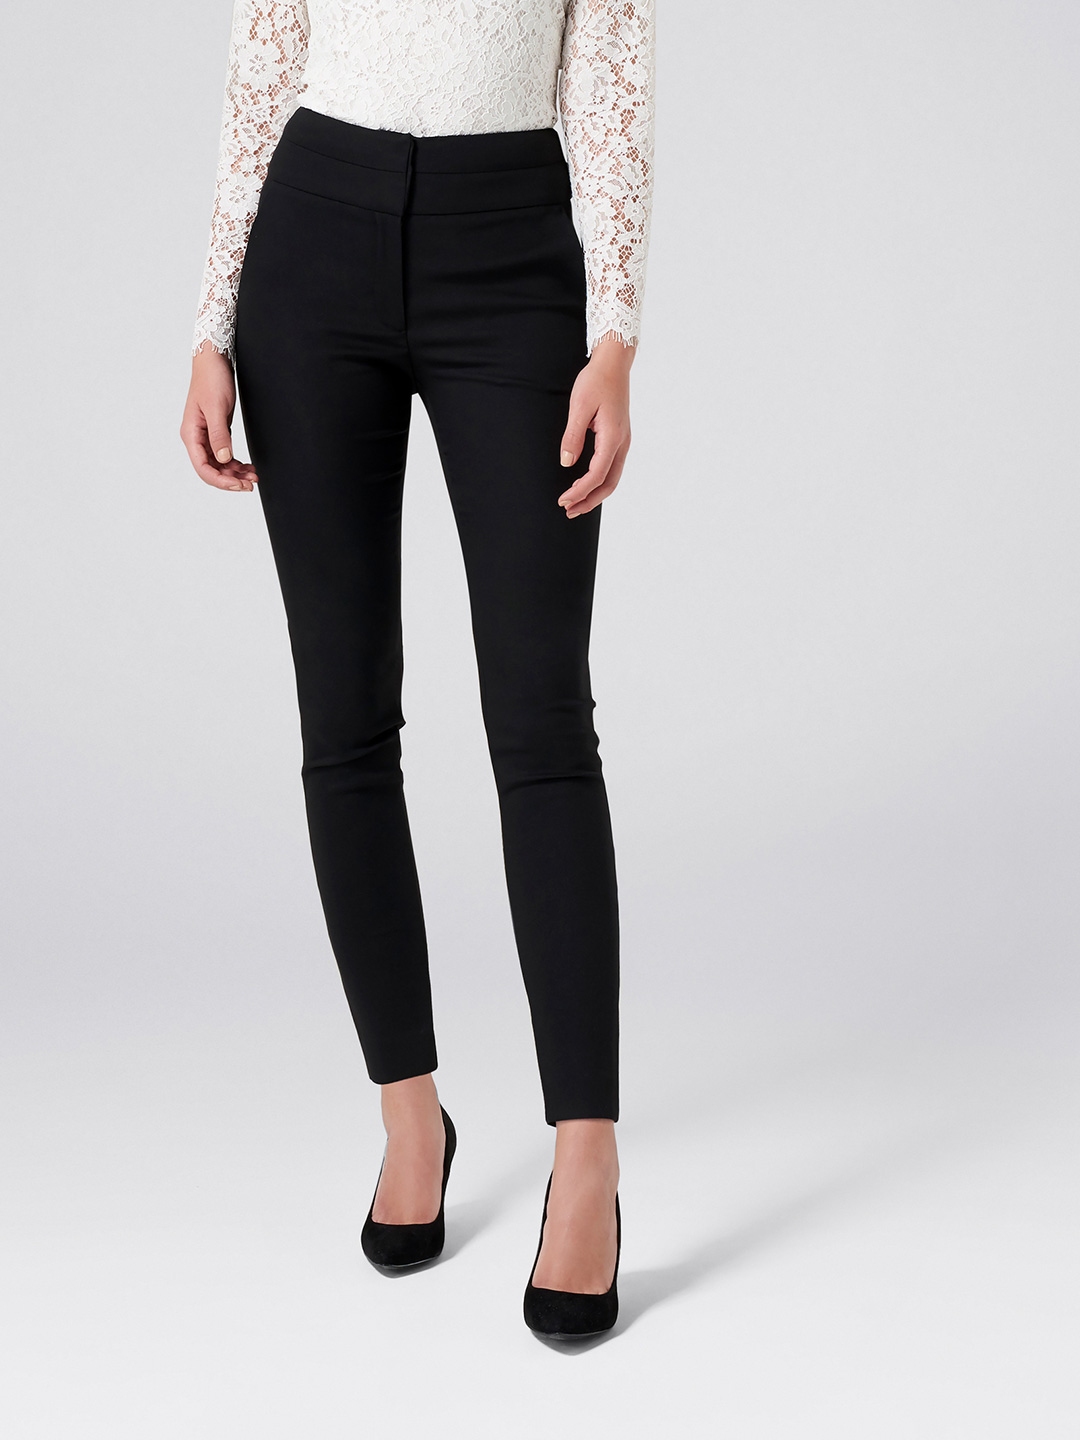 Plain Knee Lenght Black Women Formal Pants, Waist Size: 30.0 at Rs  600/piece in New Delhi